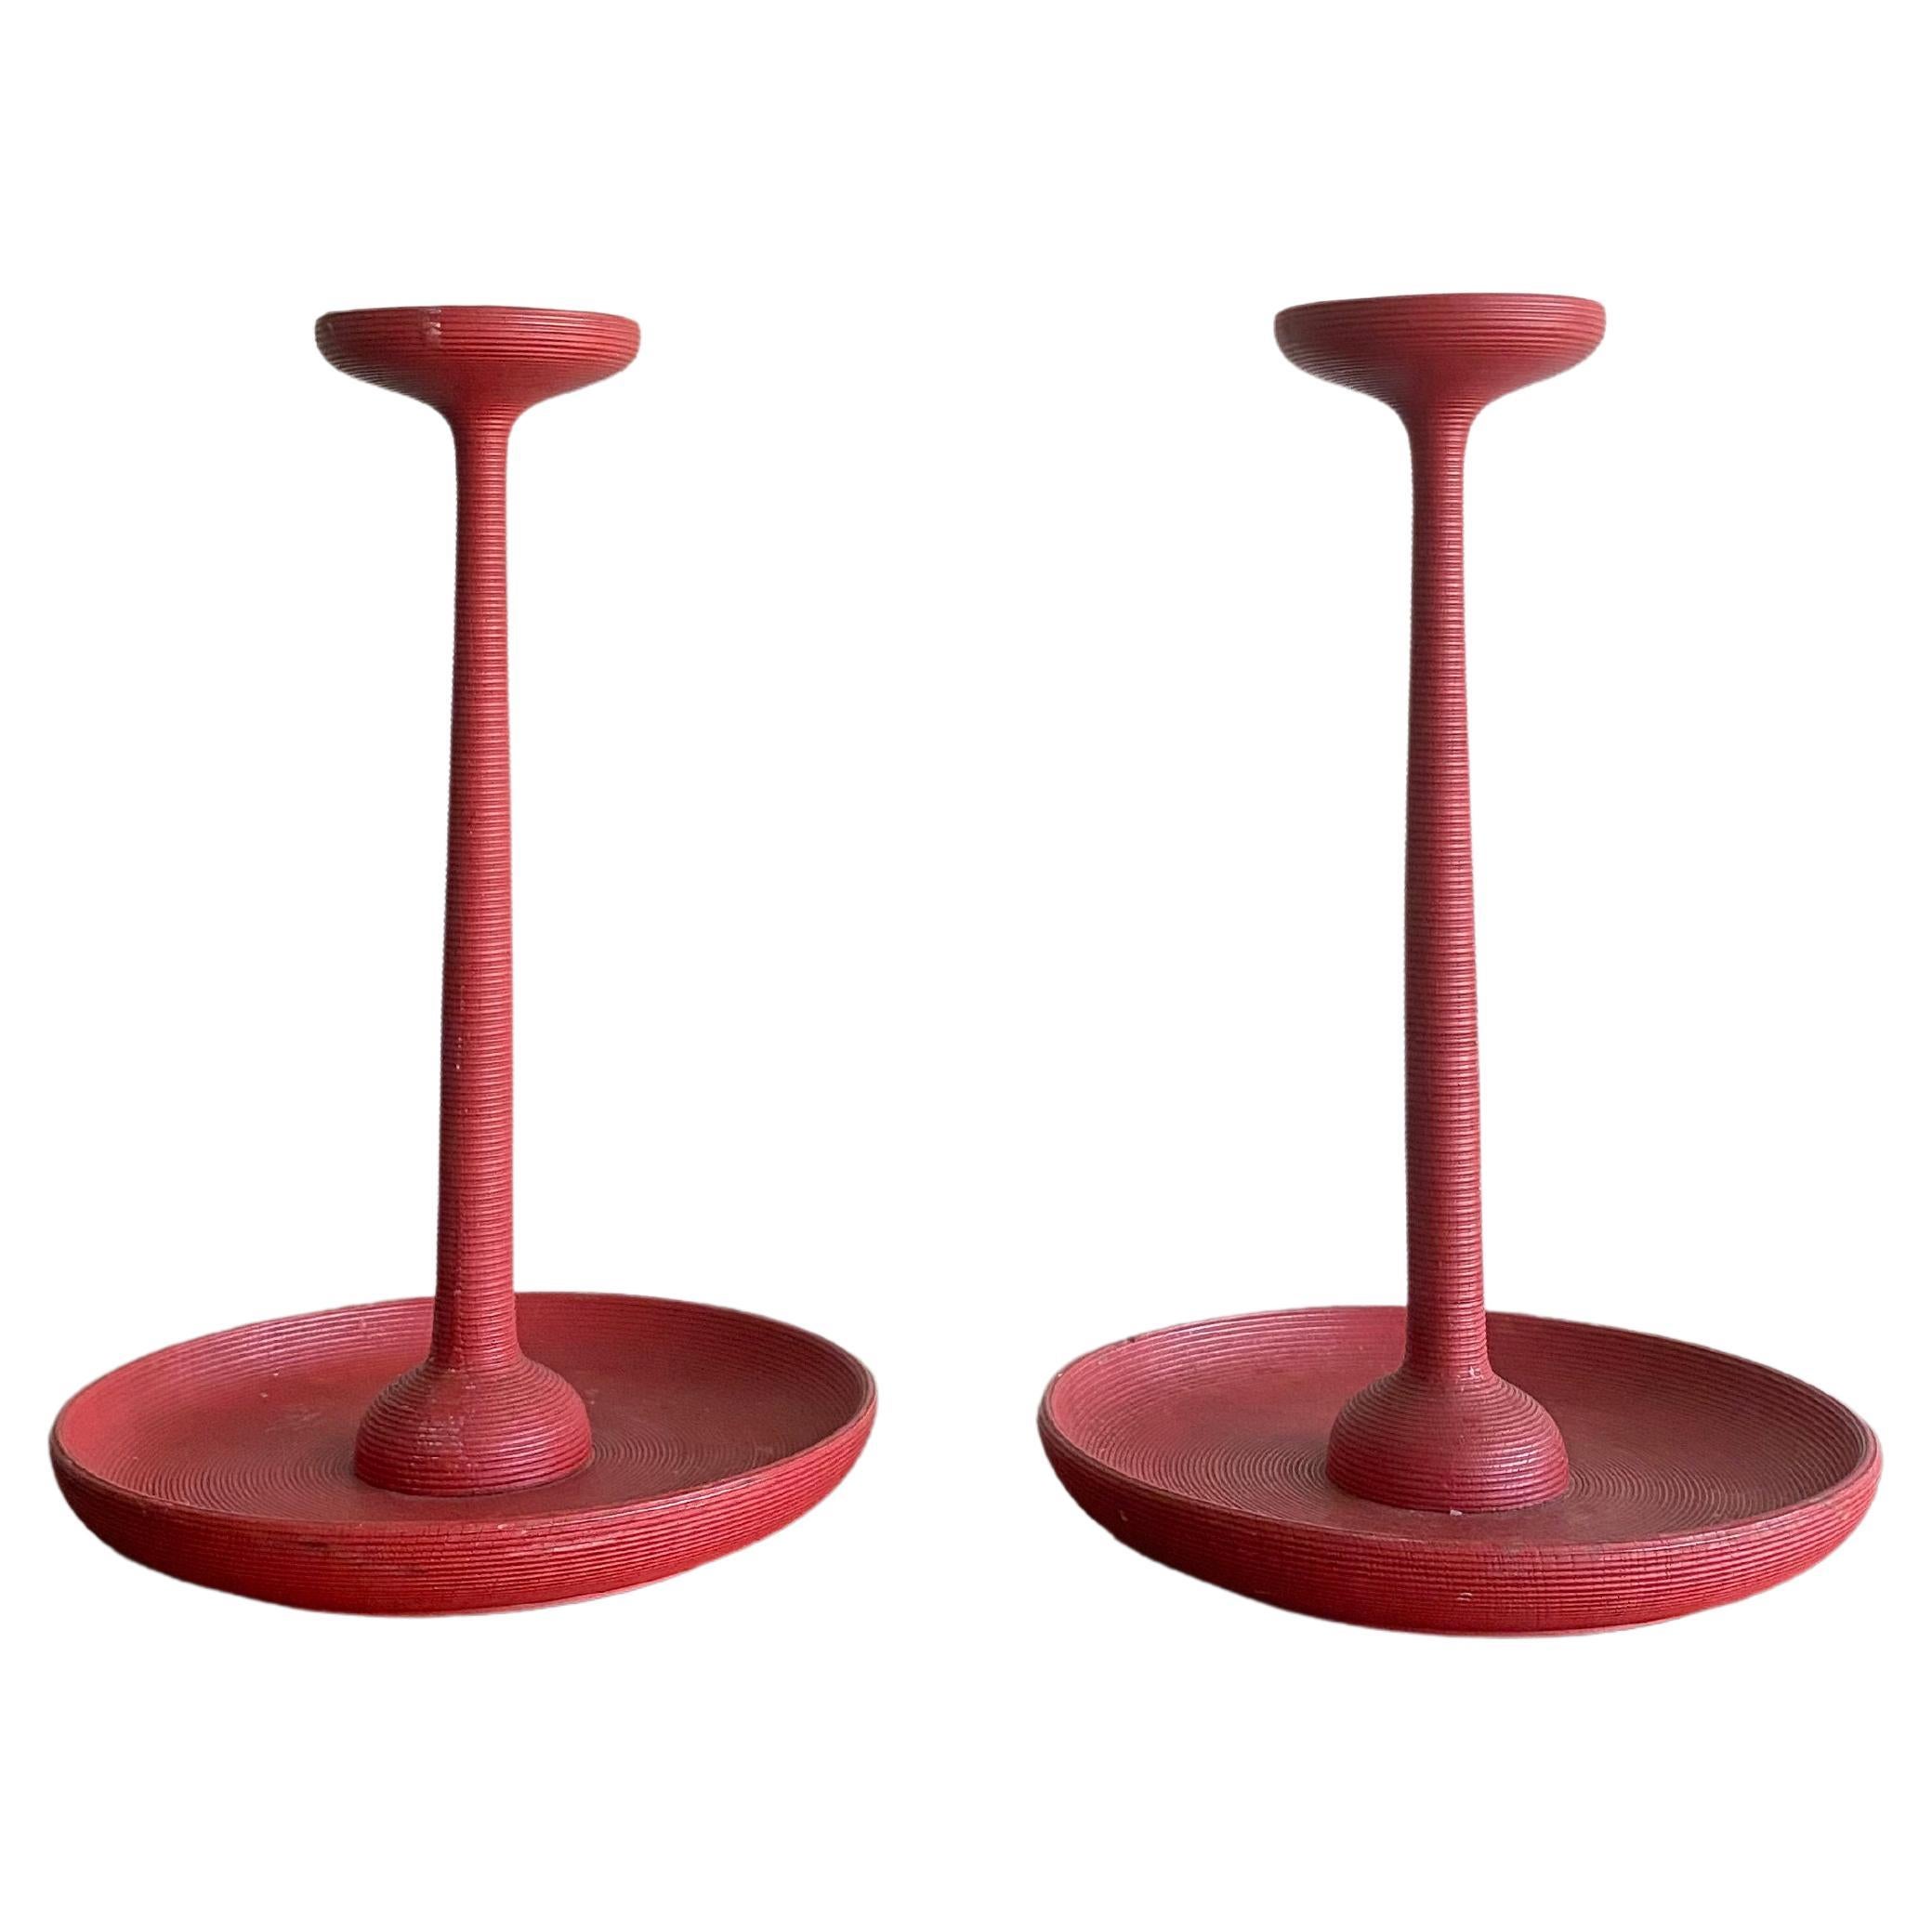 Japanese Red Lacquer Ribbed Candle Holder Pair, Meji Period c. 1900